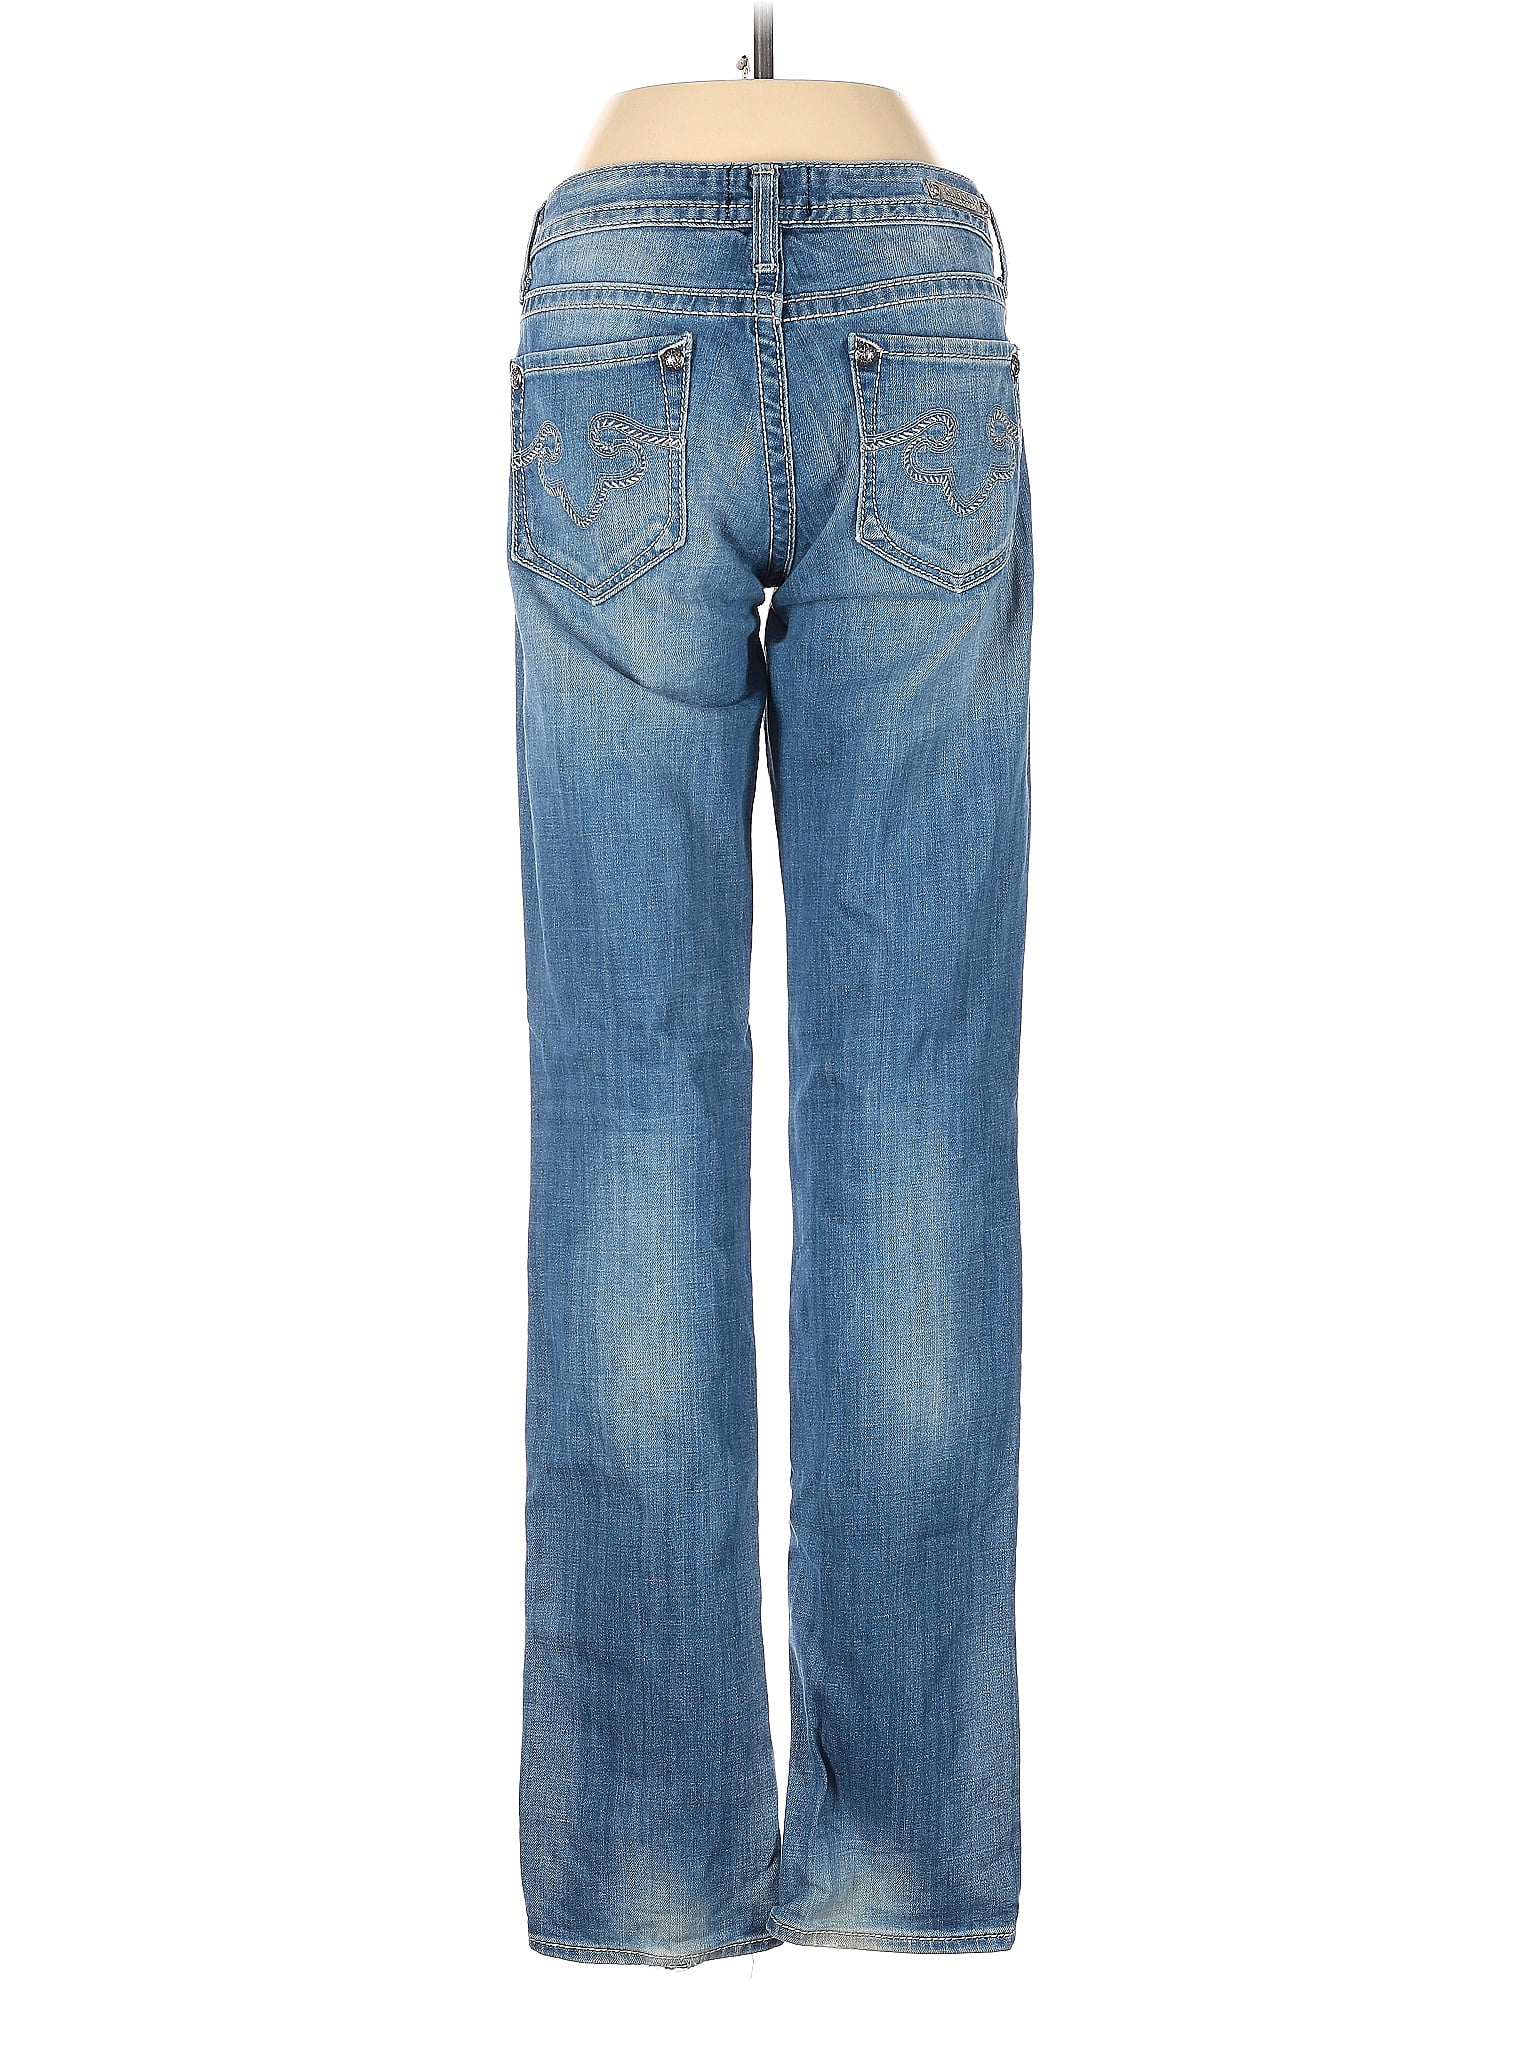 EXPRESS Rerock Jeans Blue Size 4 - $40 (63% Off Retail) - From Rayne